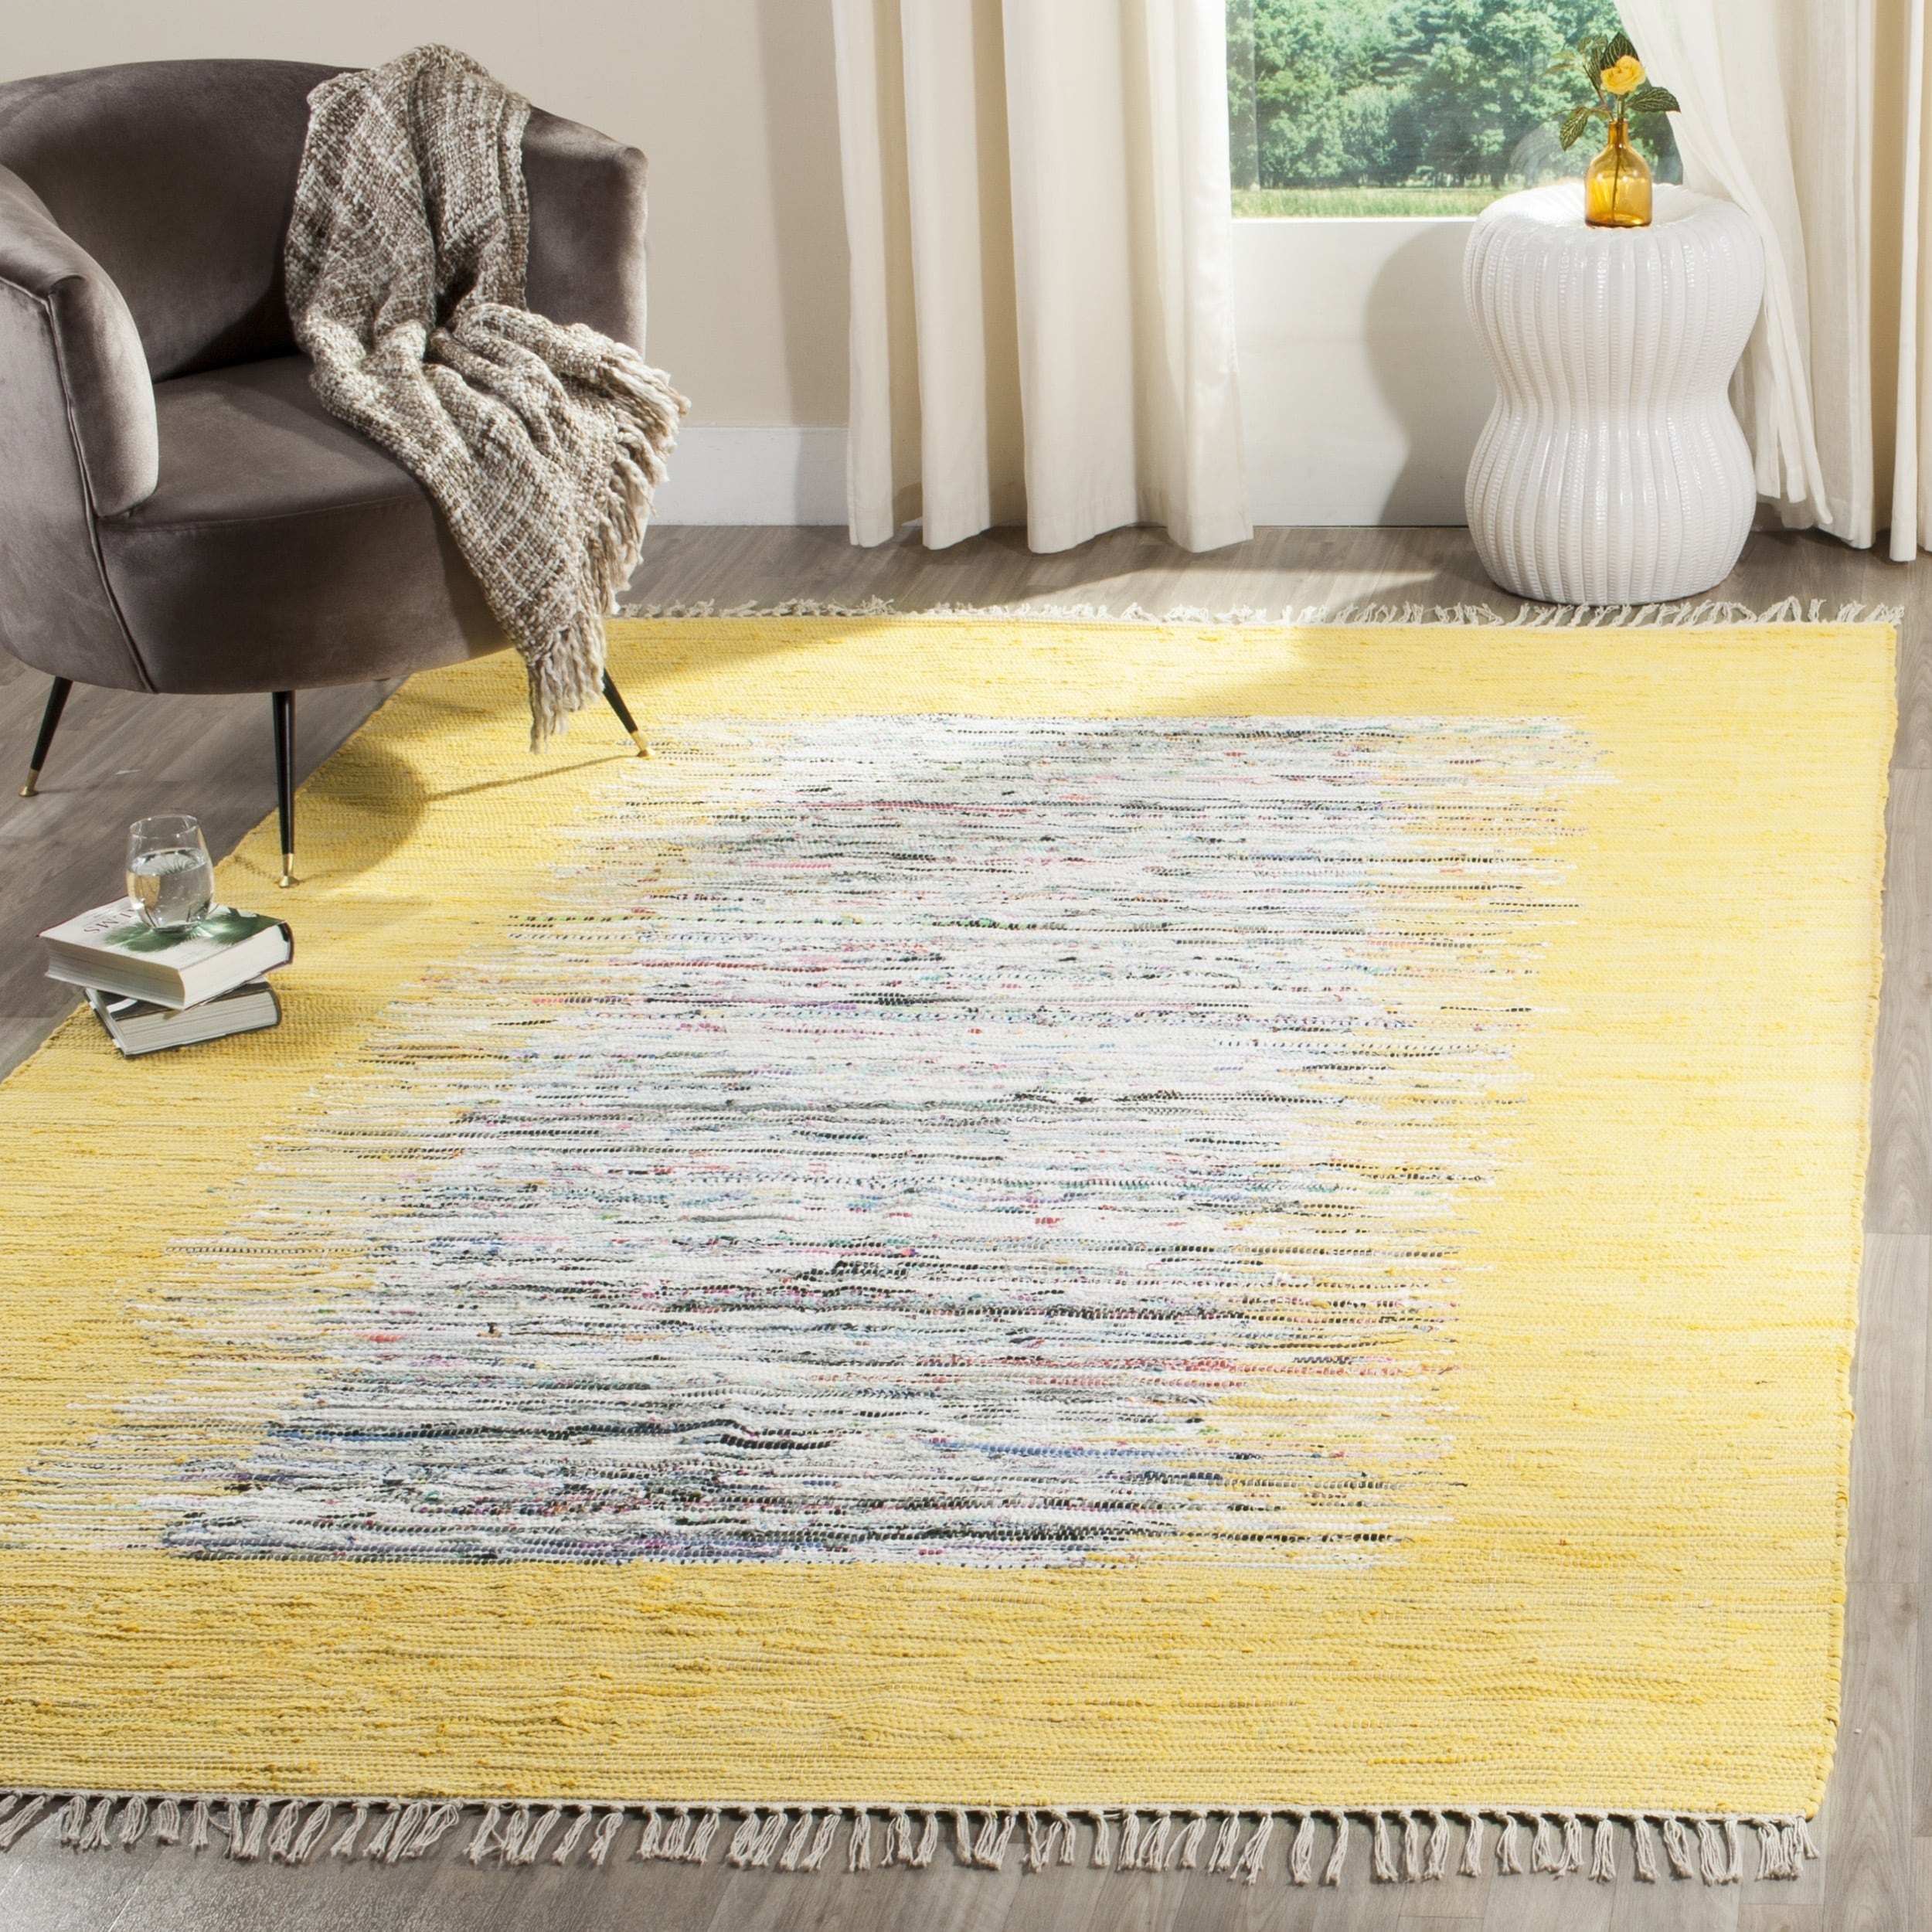 Woven cotton rugs